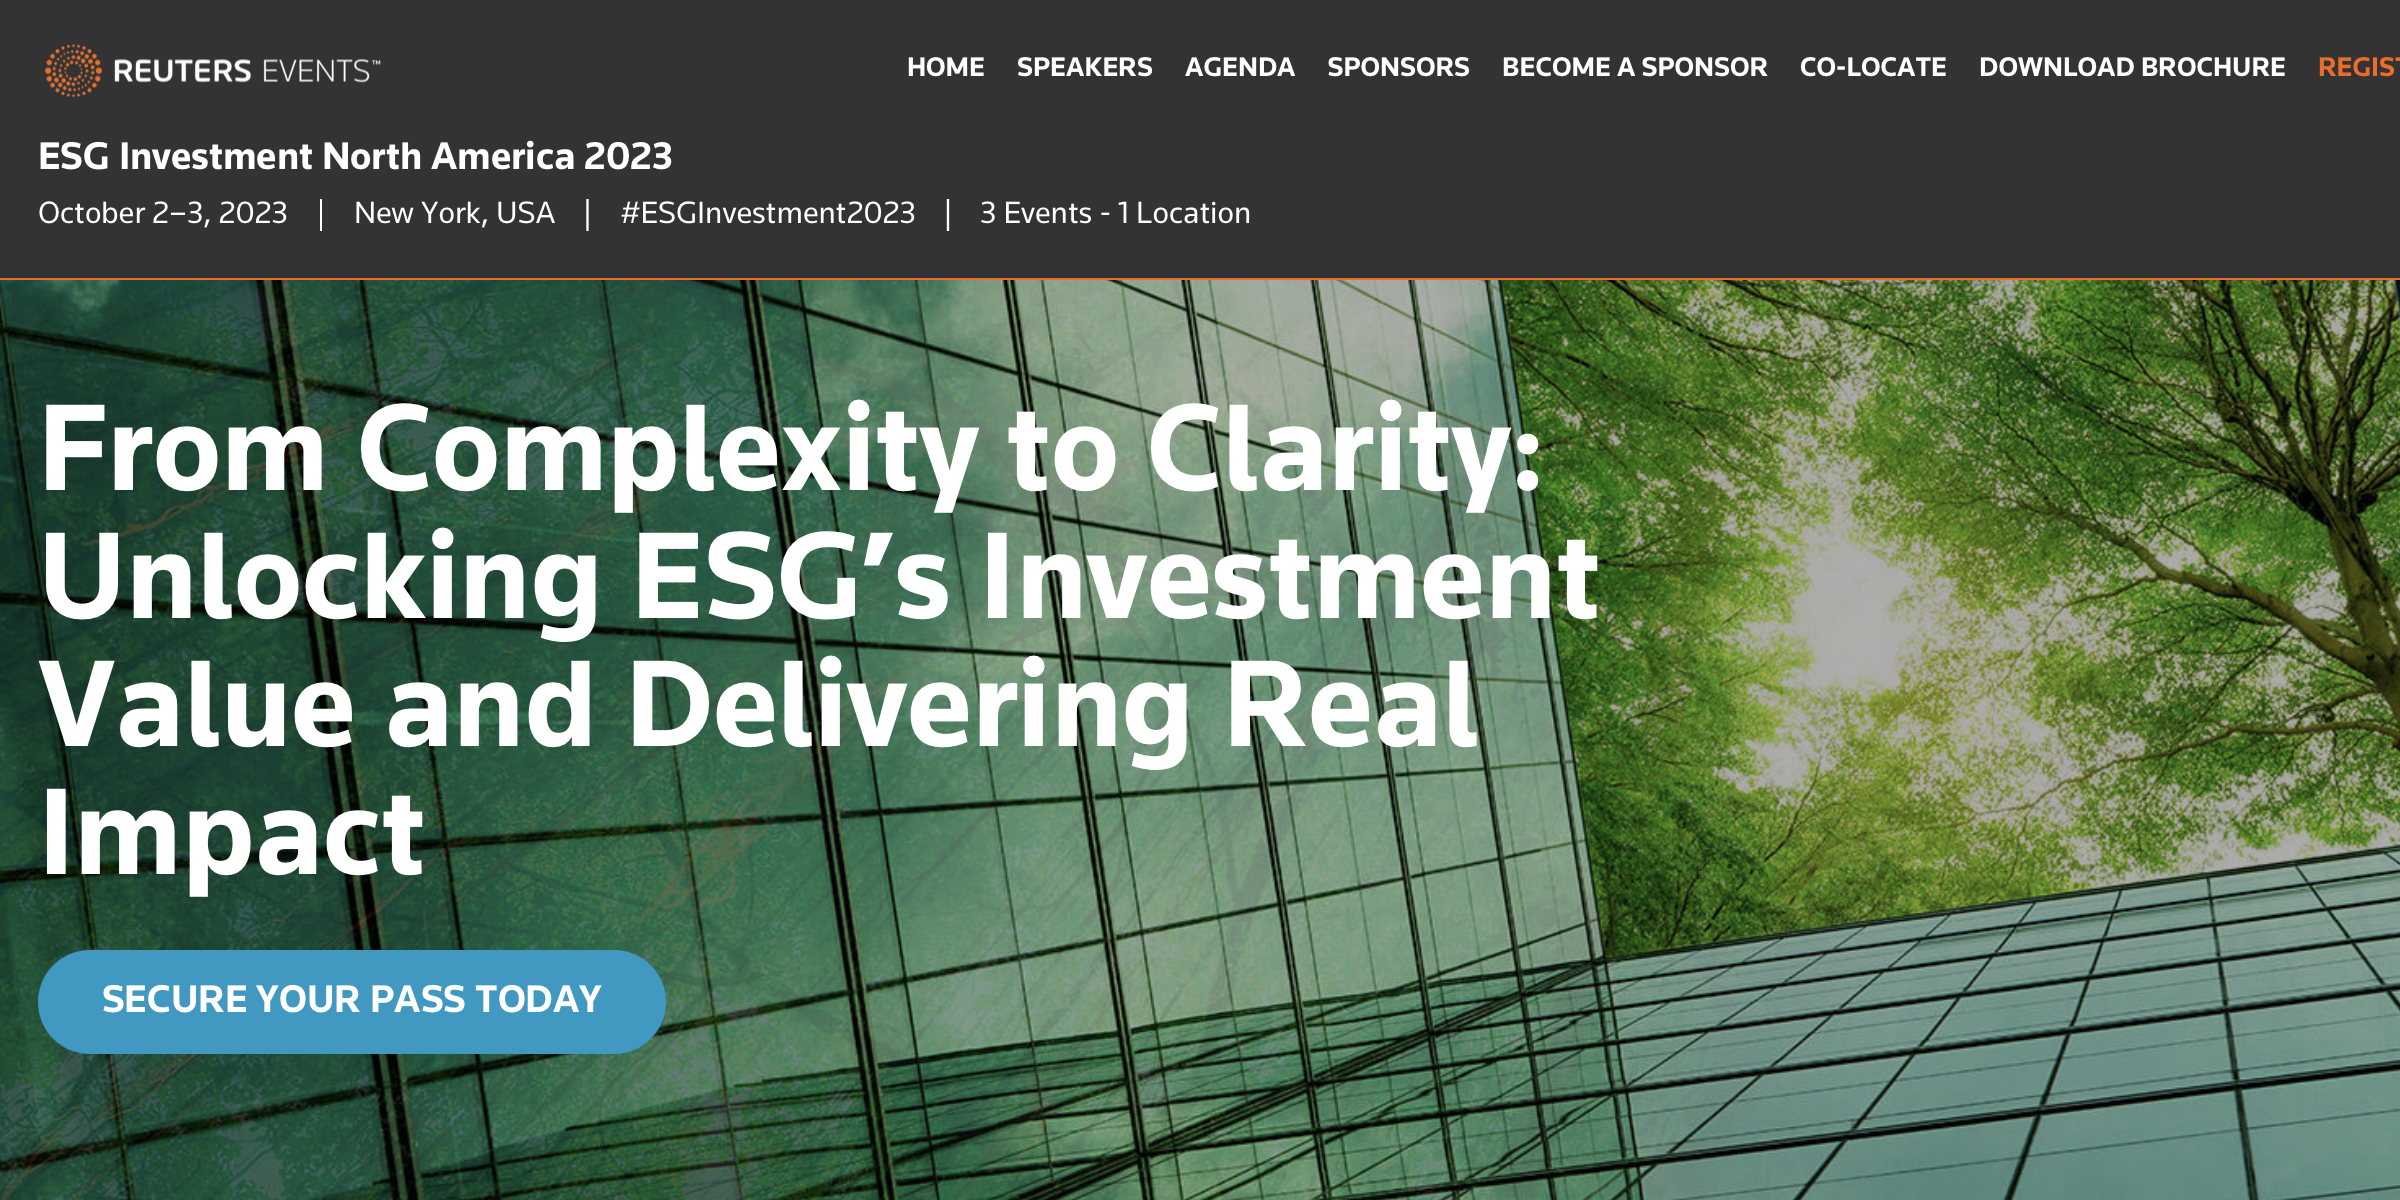 Image featuring OWL ESG's tagline 'From Complexity to Clarity', set against a sleek, modern background.